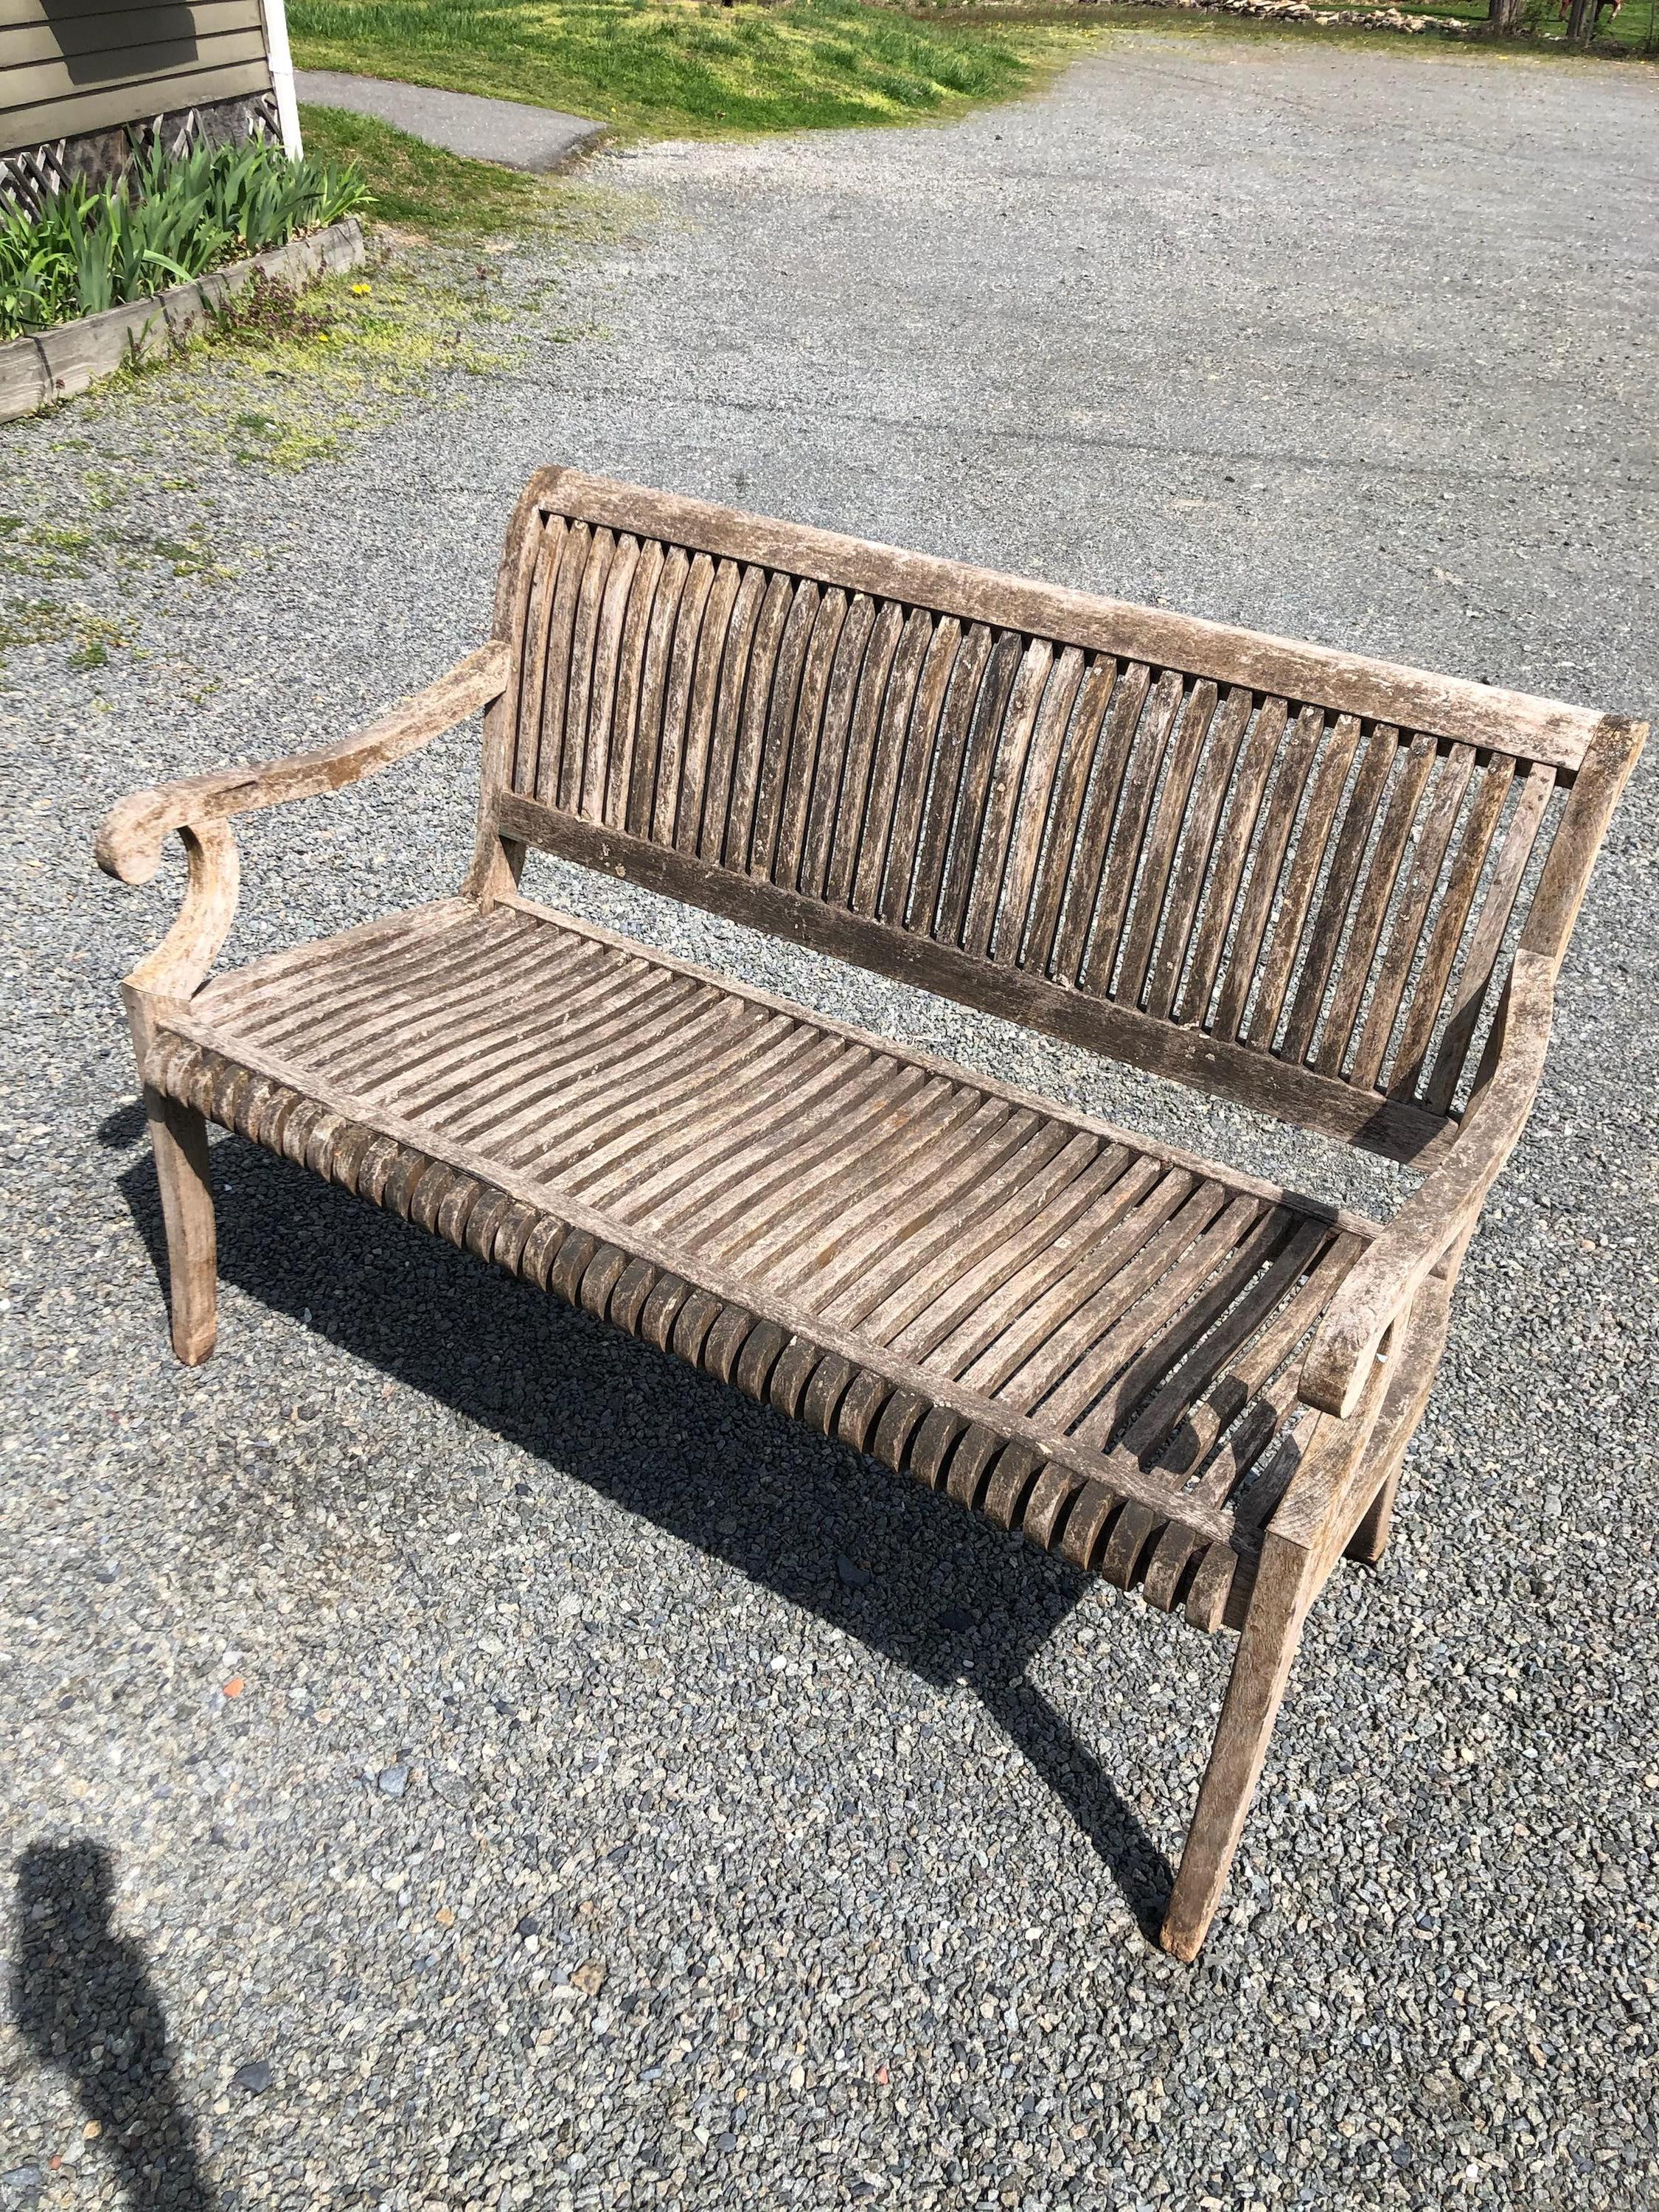 Vintage Teak Garden Bench By Smith And Hawken At 1stdibs